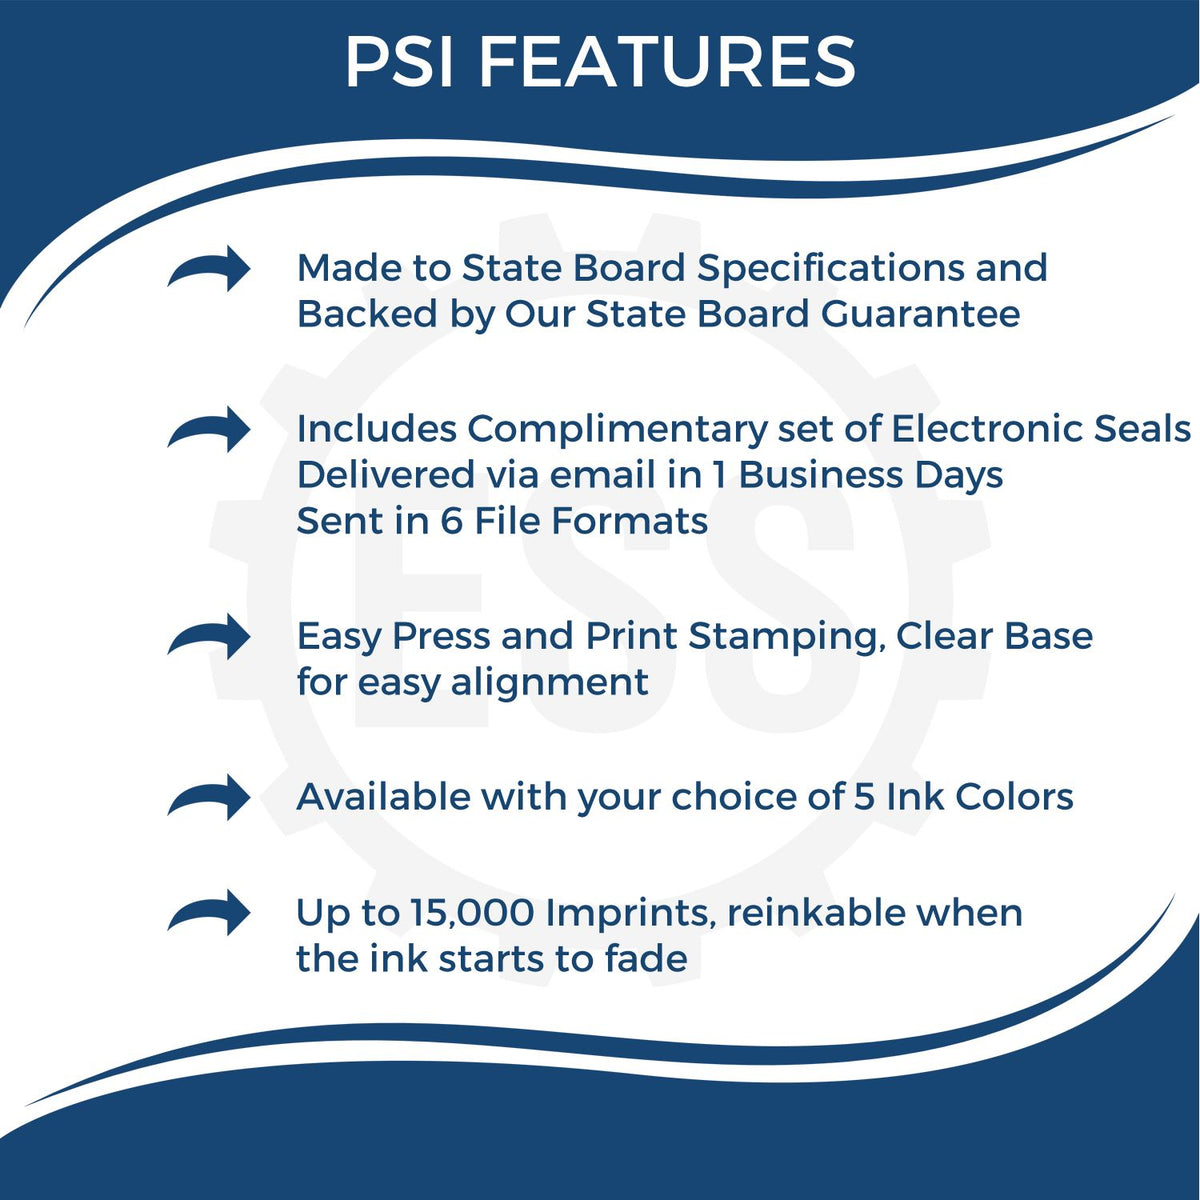 A picture of an infographic highlighting the selling points for the PSI Nevada Notary Stamp